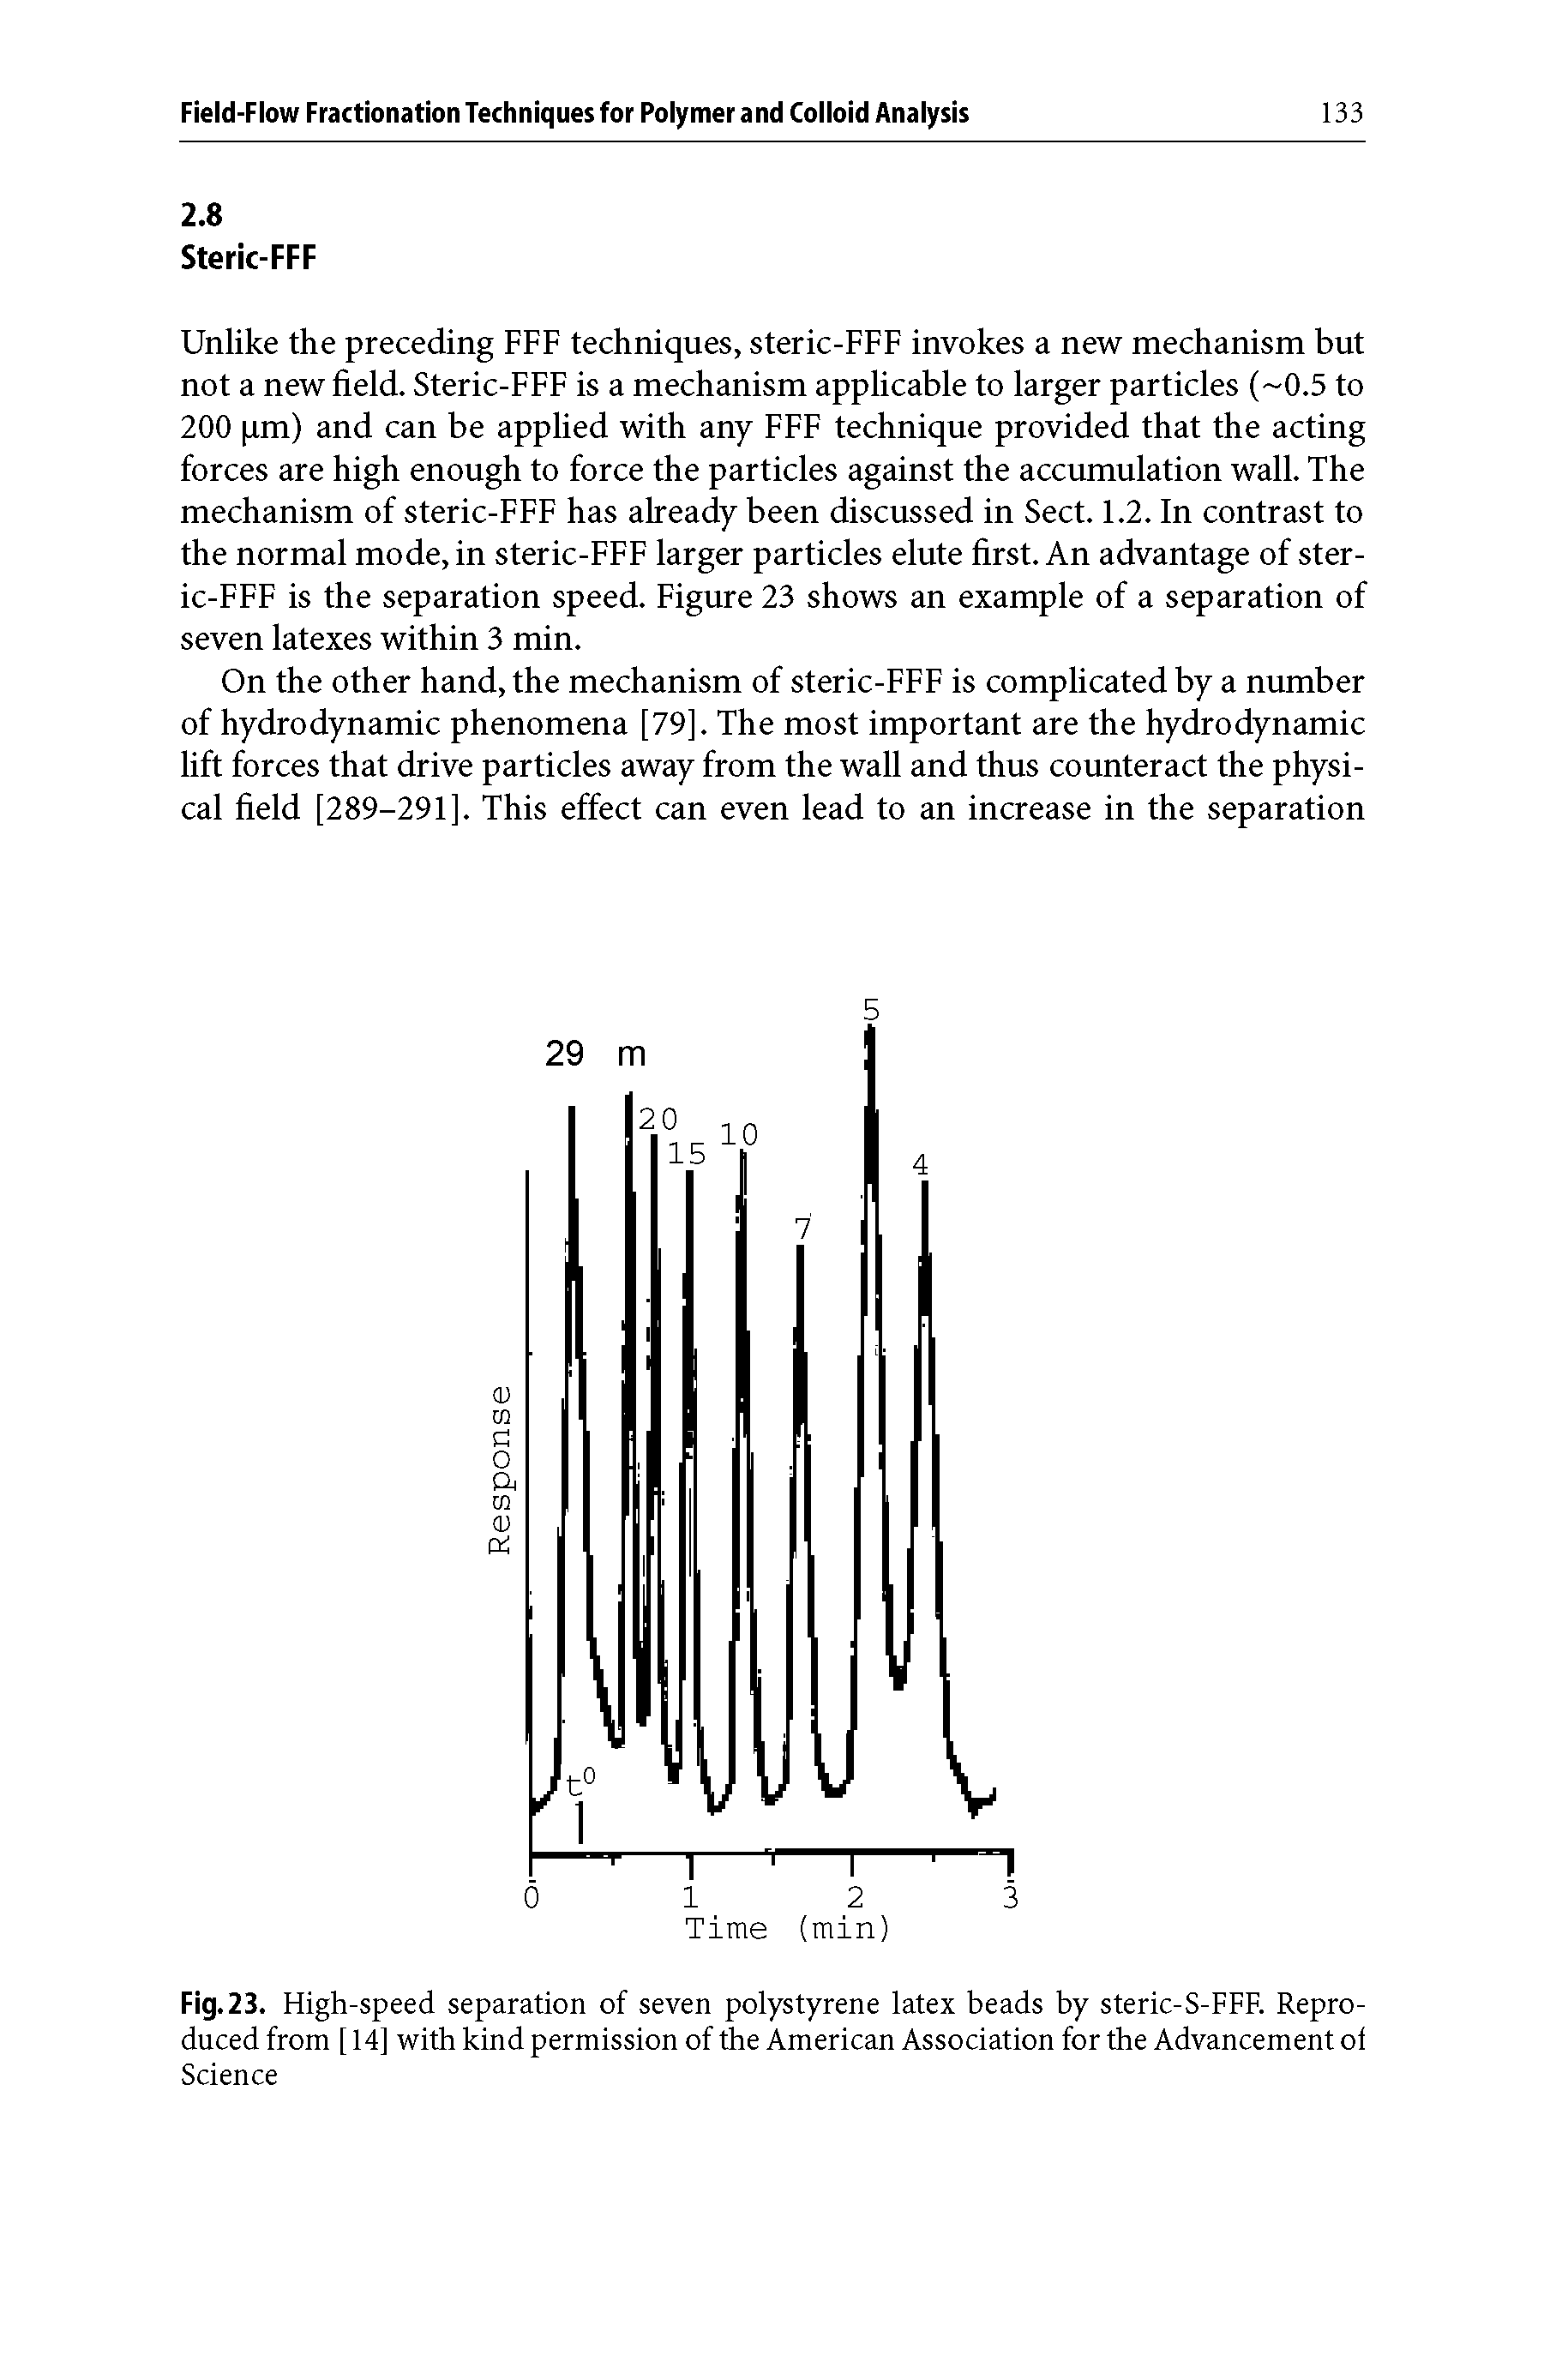 Fig.23. High-speed separation of seven polystyrene latex beads by steric-S-FFF. Reproduced from [ 14] with kind permission of the American Association for the Advancement of Science...